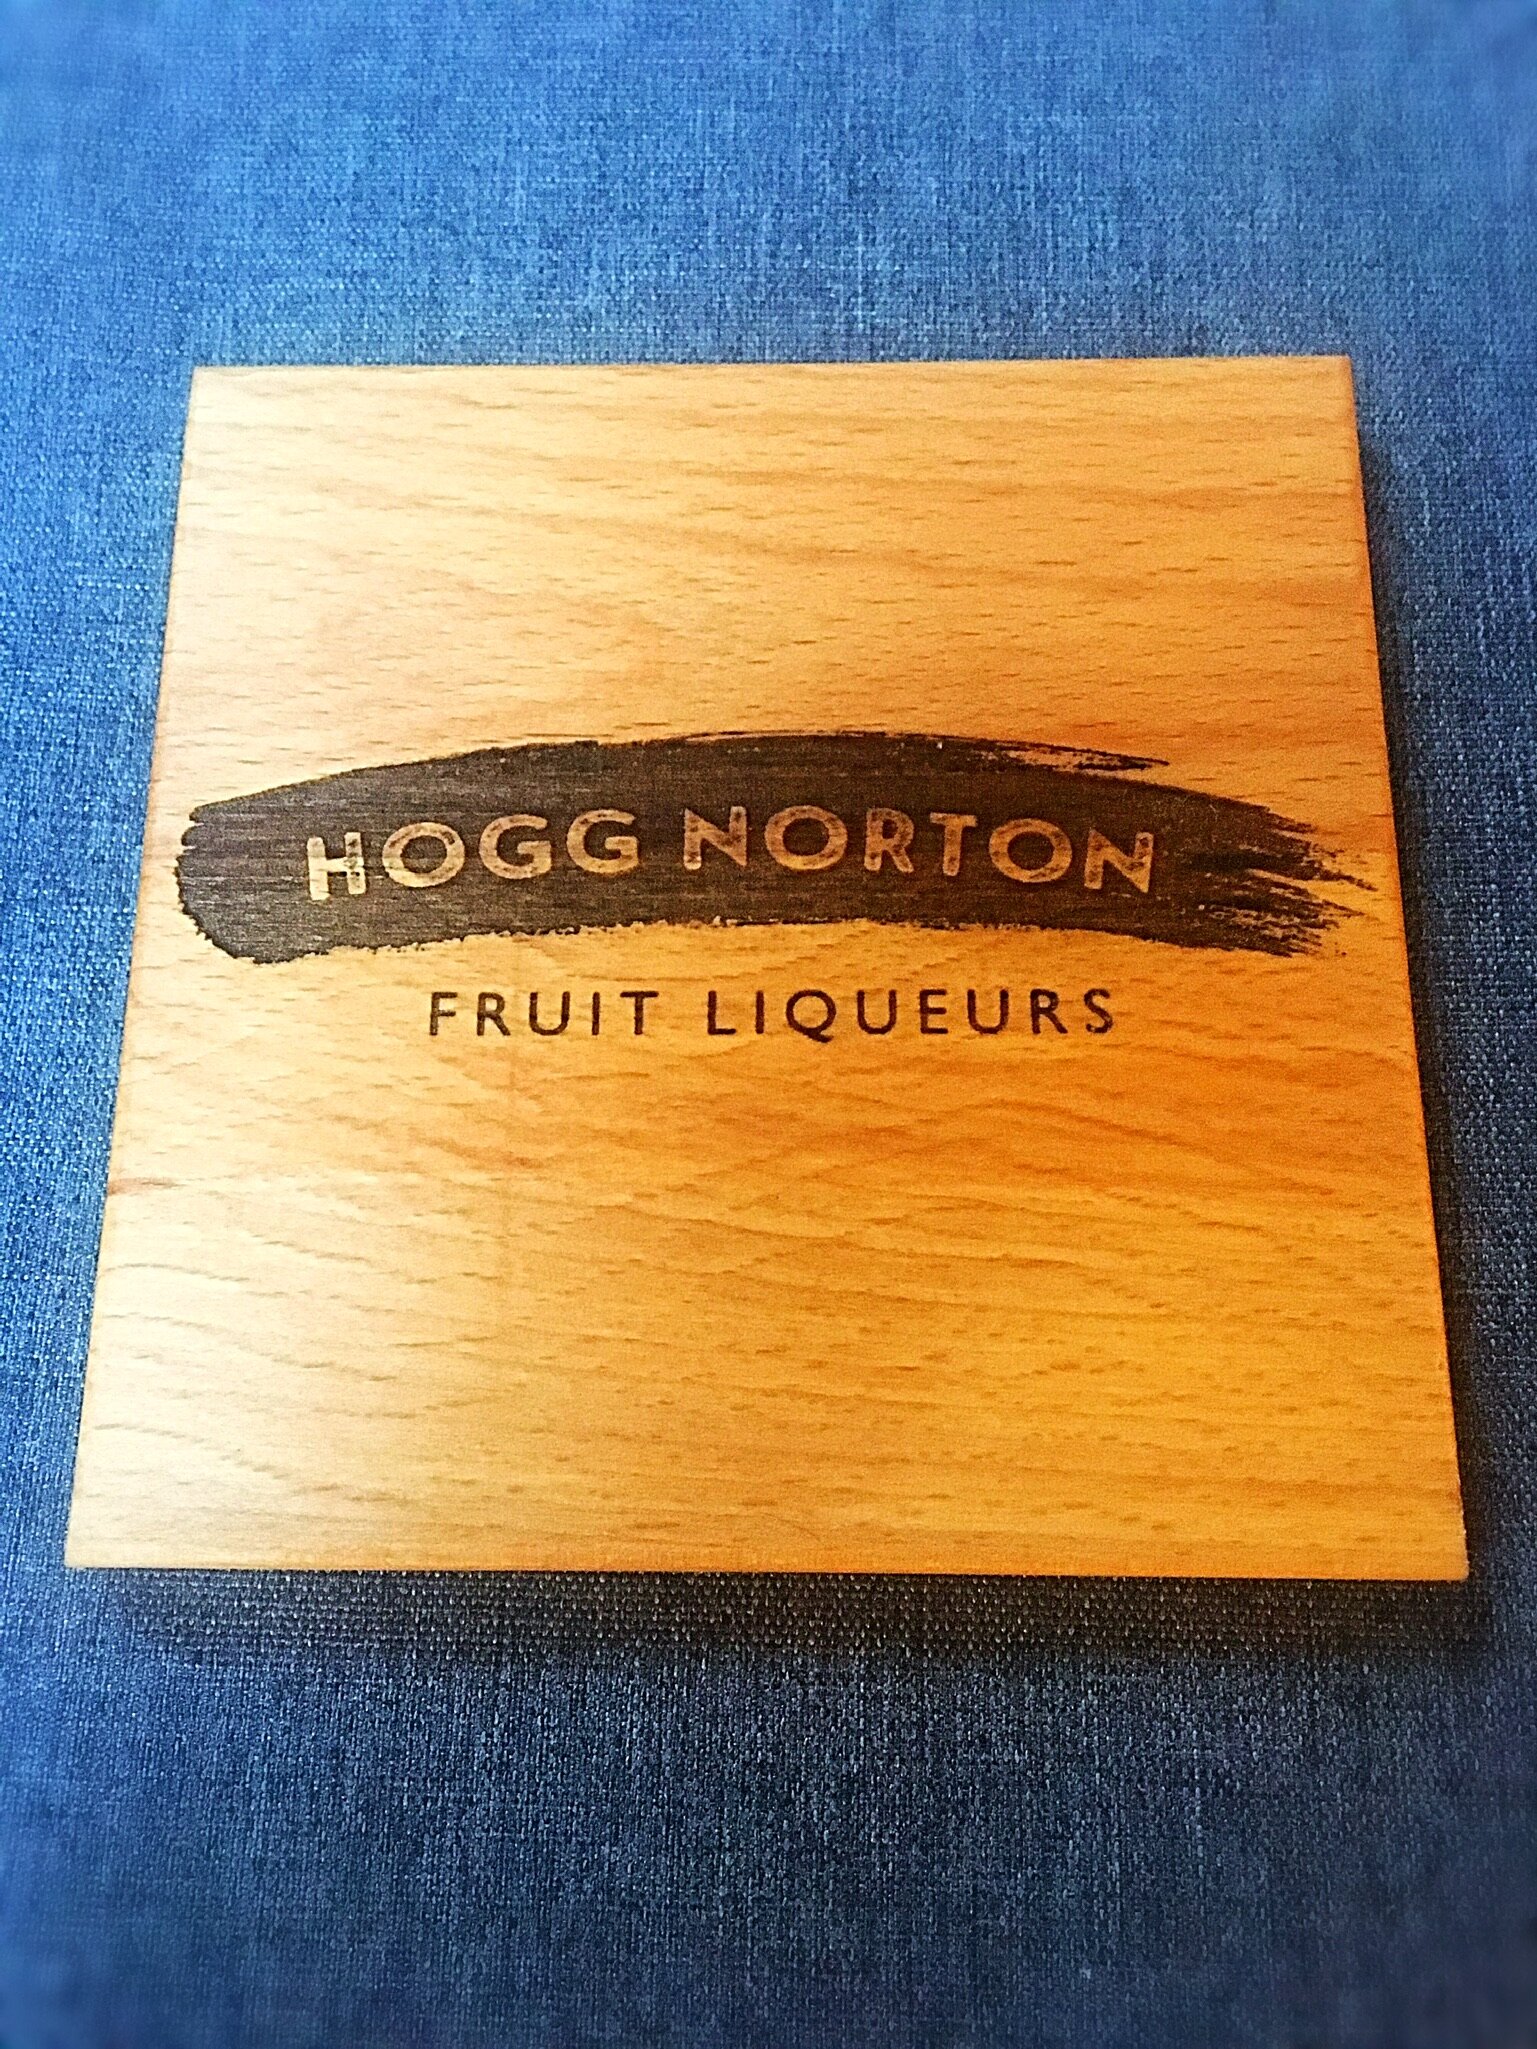 We were delighted to be asked to make these fabulous Solid Beech Coasters for our friends over at Hogg Norton Fruit Liqueurs. Due to the detail of their logo, we decided that laser engraving was the best one for this job, ensuring all the detail of the logo was perfectly captured.  Based in Chesterfield, Derbyshire Hogg Norton produce fruit liqueurs without additives or preservatives which are gluten-free and vegan friendly! They use the freshest ingredients and a little magic!  Find out all about their delicious liqueurs  here